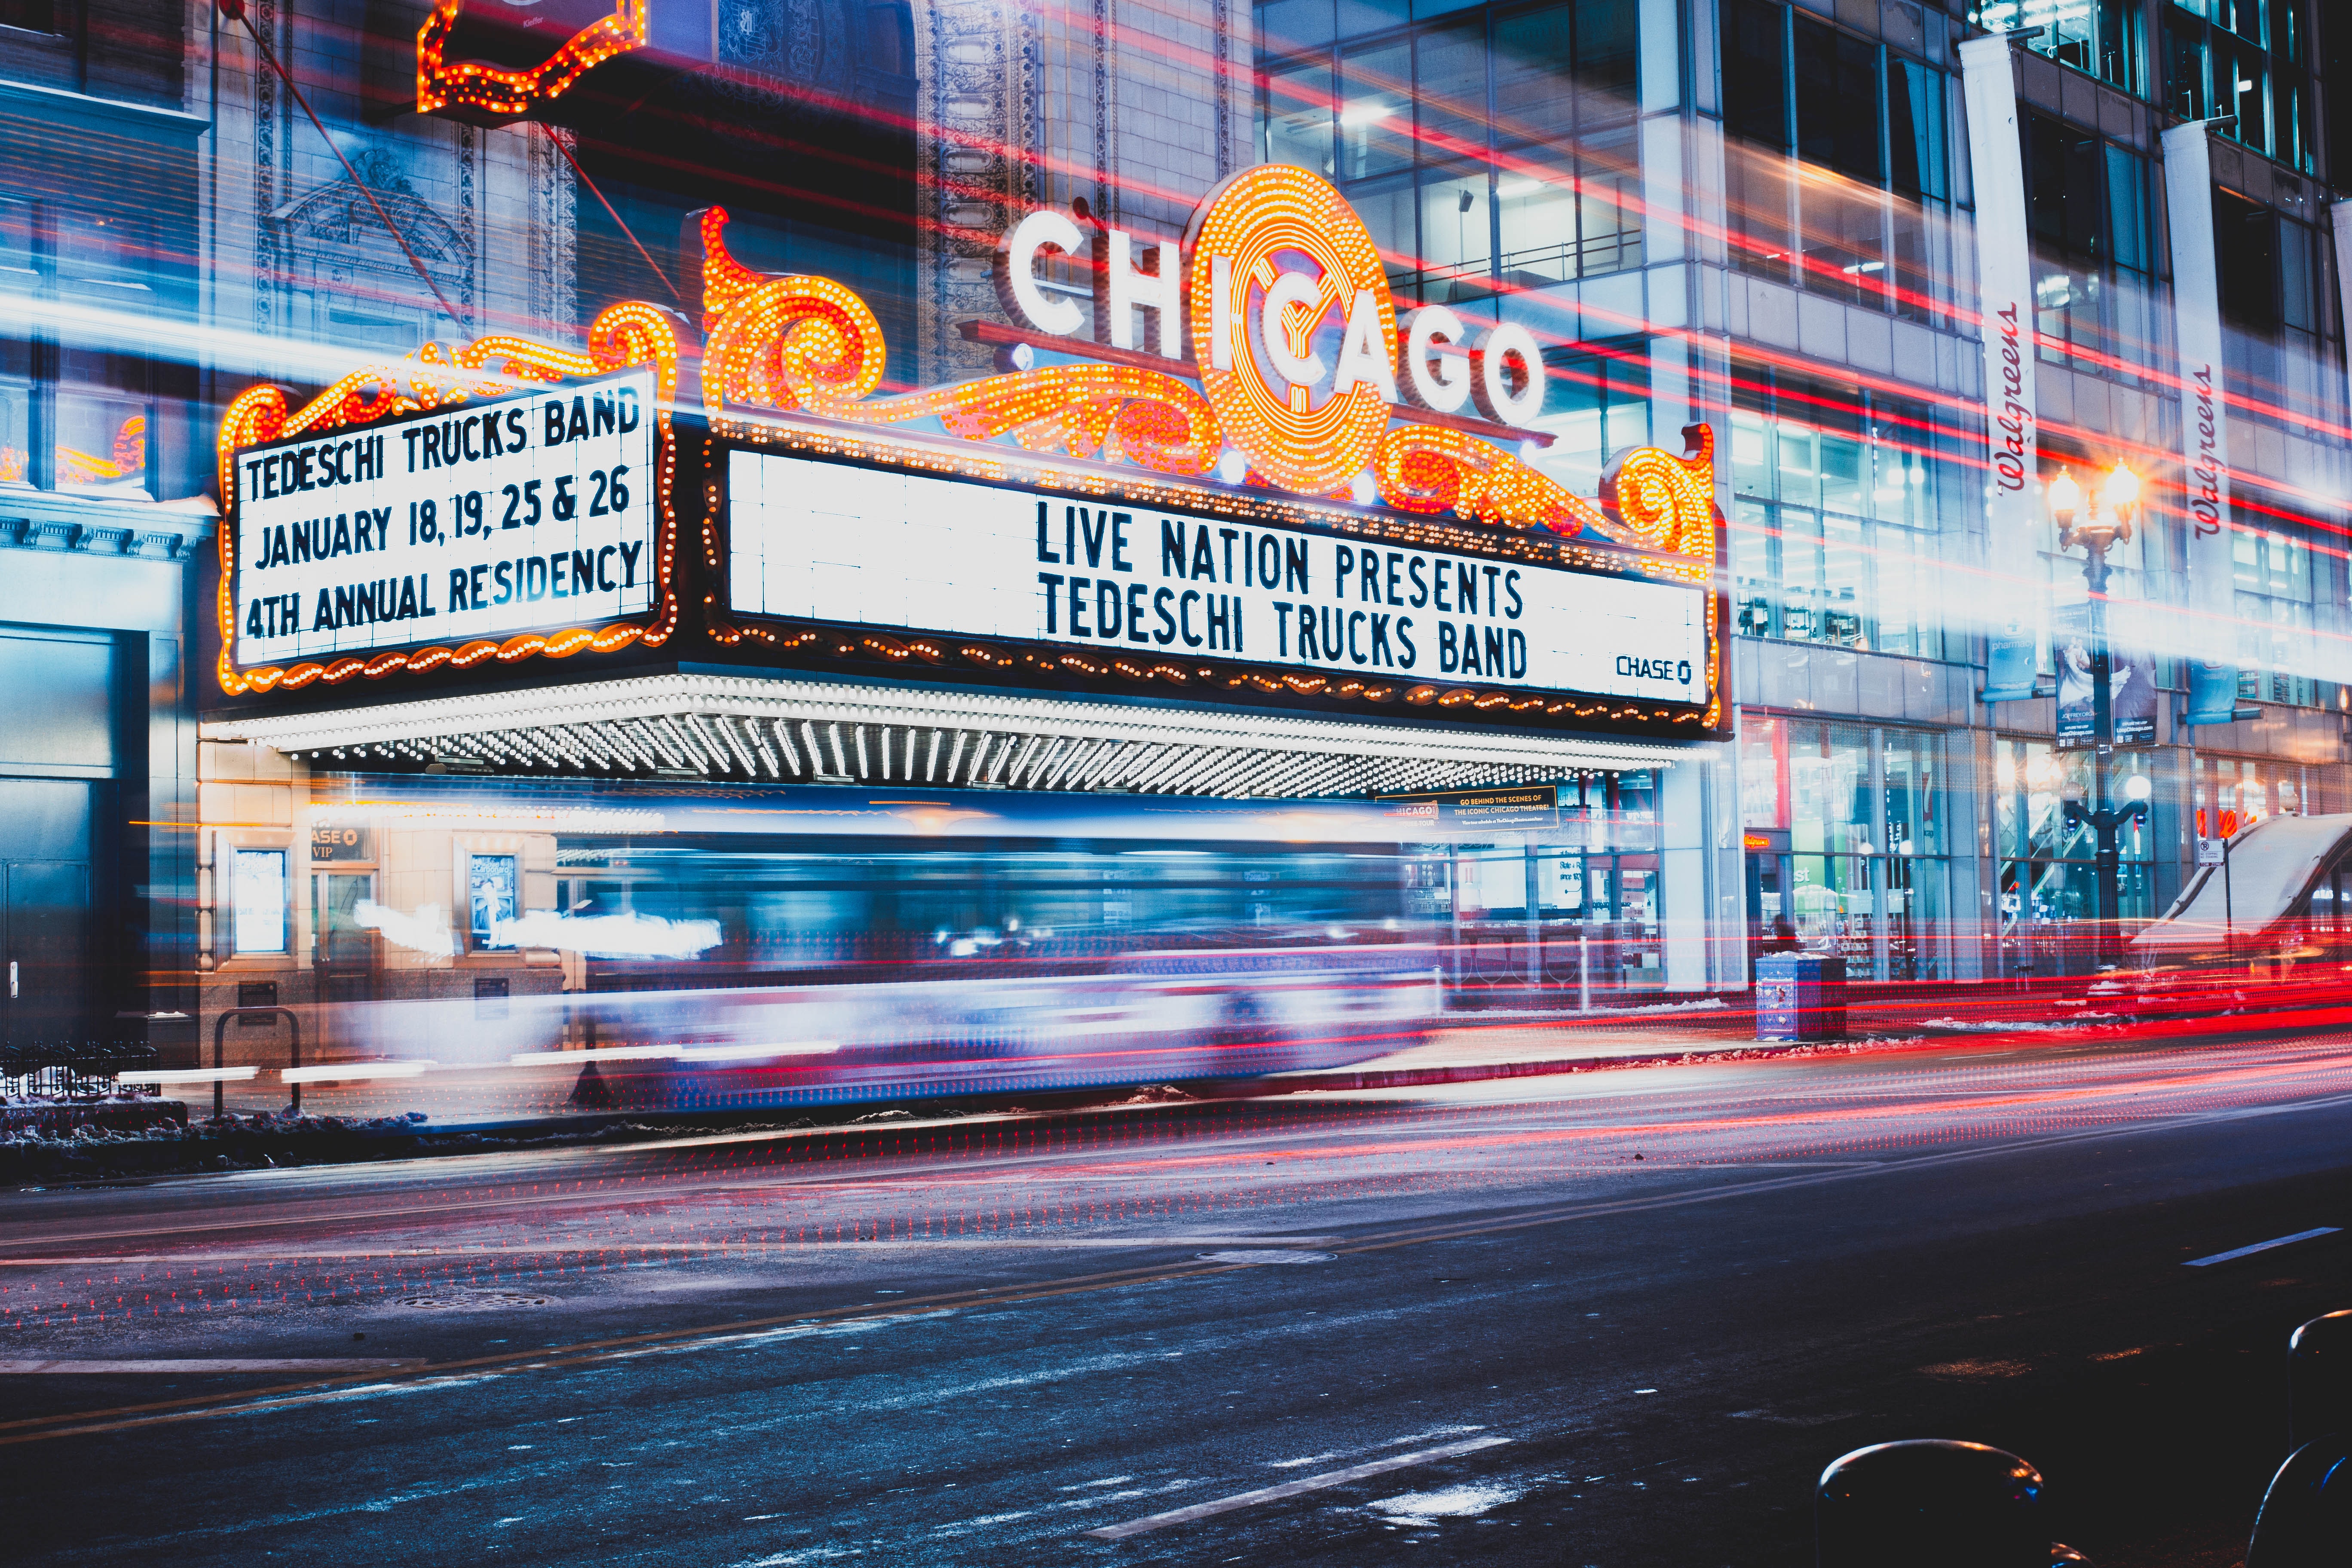 Time-lapse photography of the Chicago Theater at night